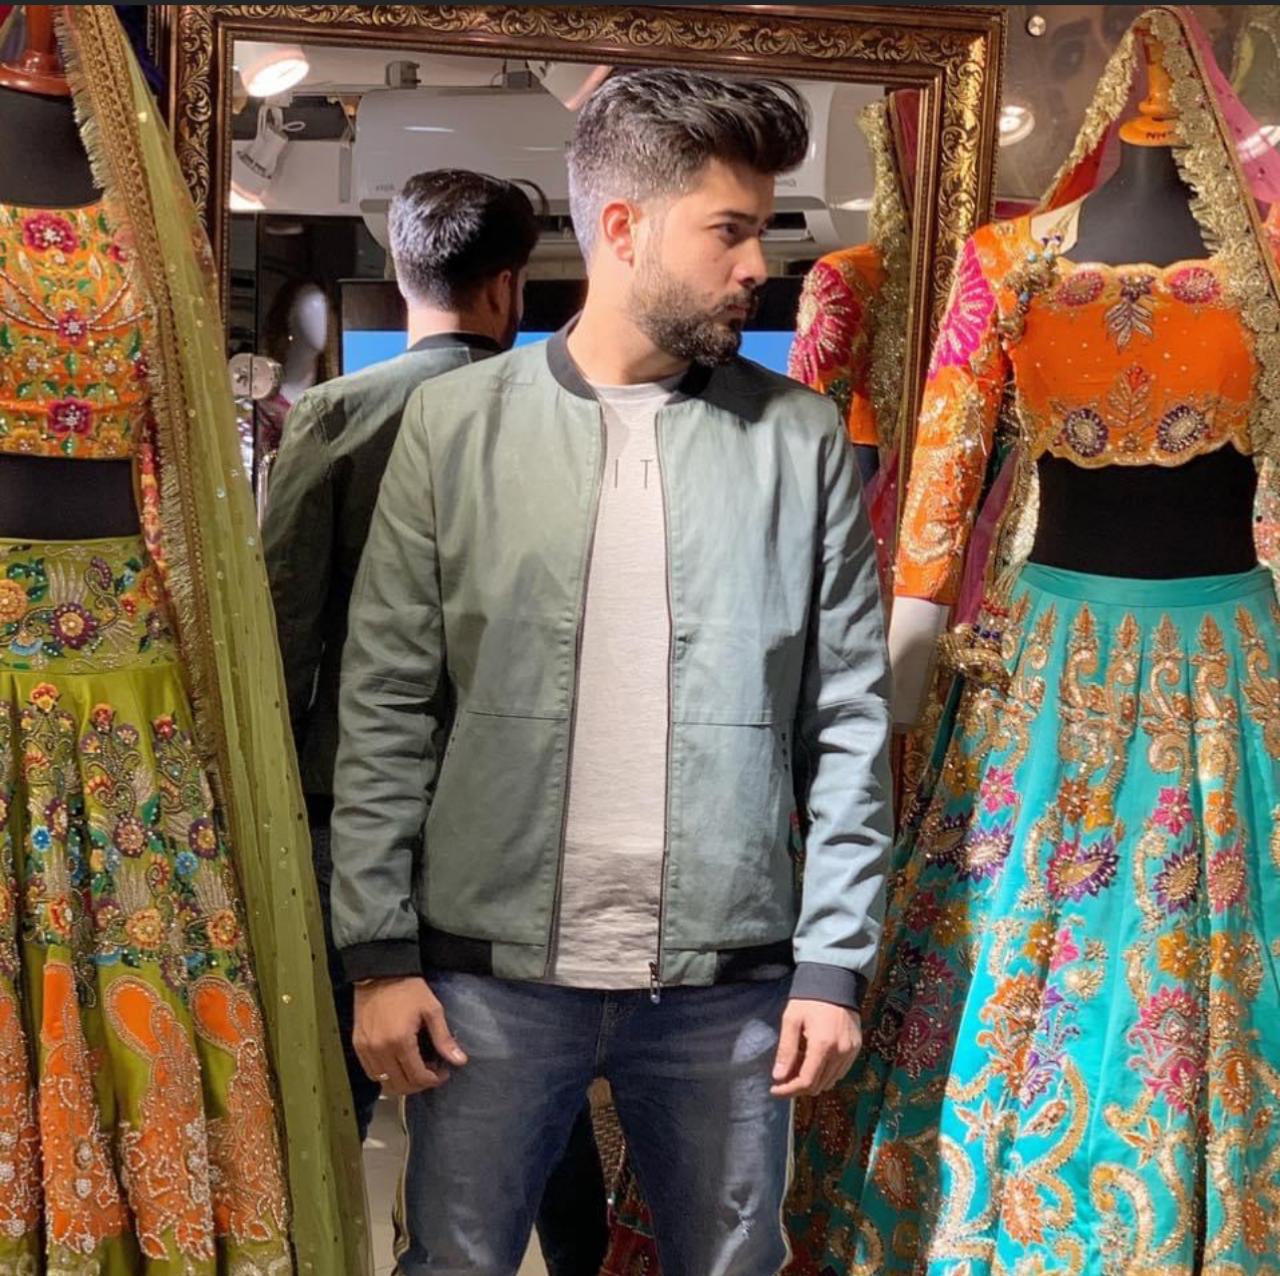 Noman and Bhaiya is about to shine in the ethnic wear industry: Noman Siddqui